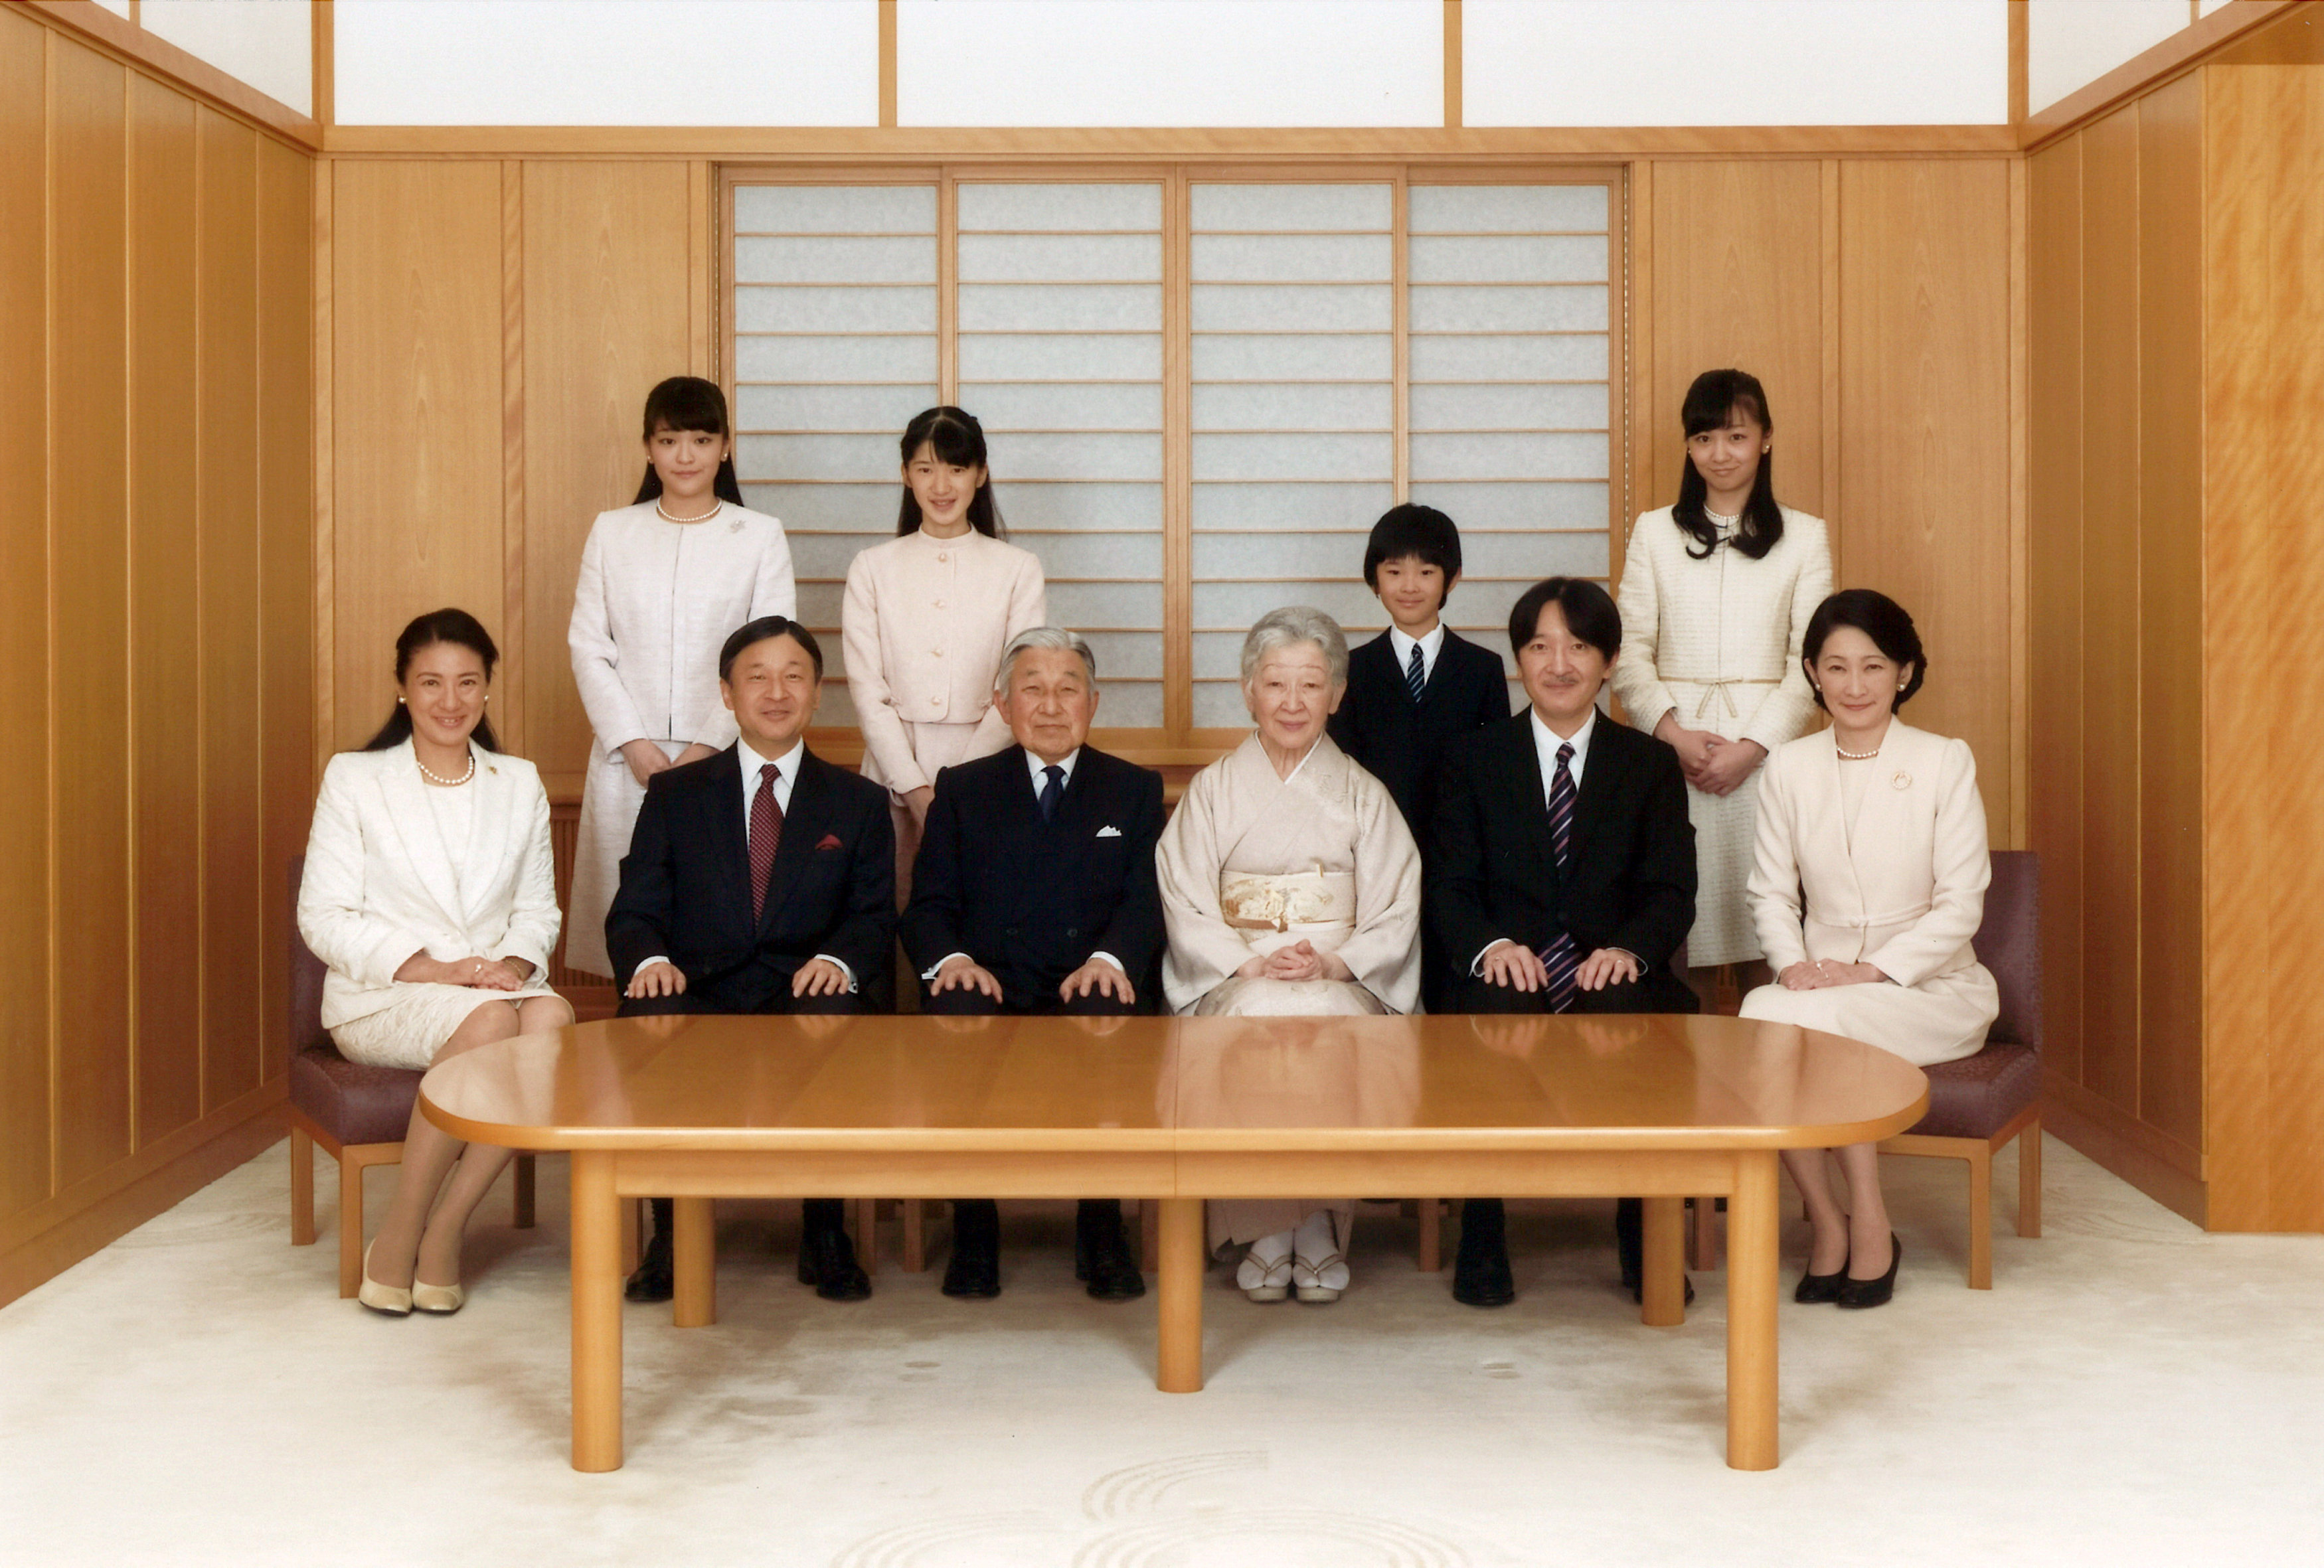 Emperor Akihito and Empress Michiko pose with their family members during a photo session at the Imperial Palace in Tokyo in 2016. | REUTERS